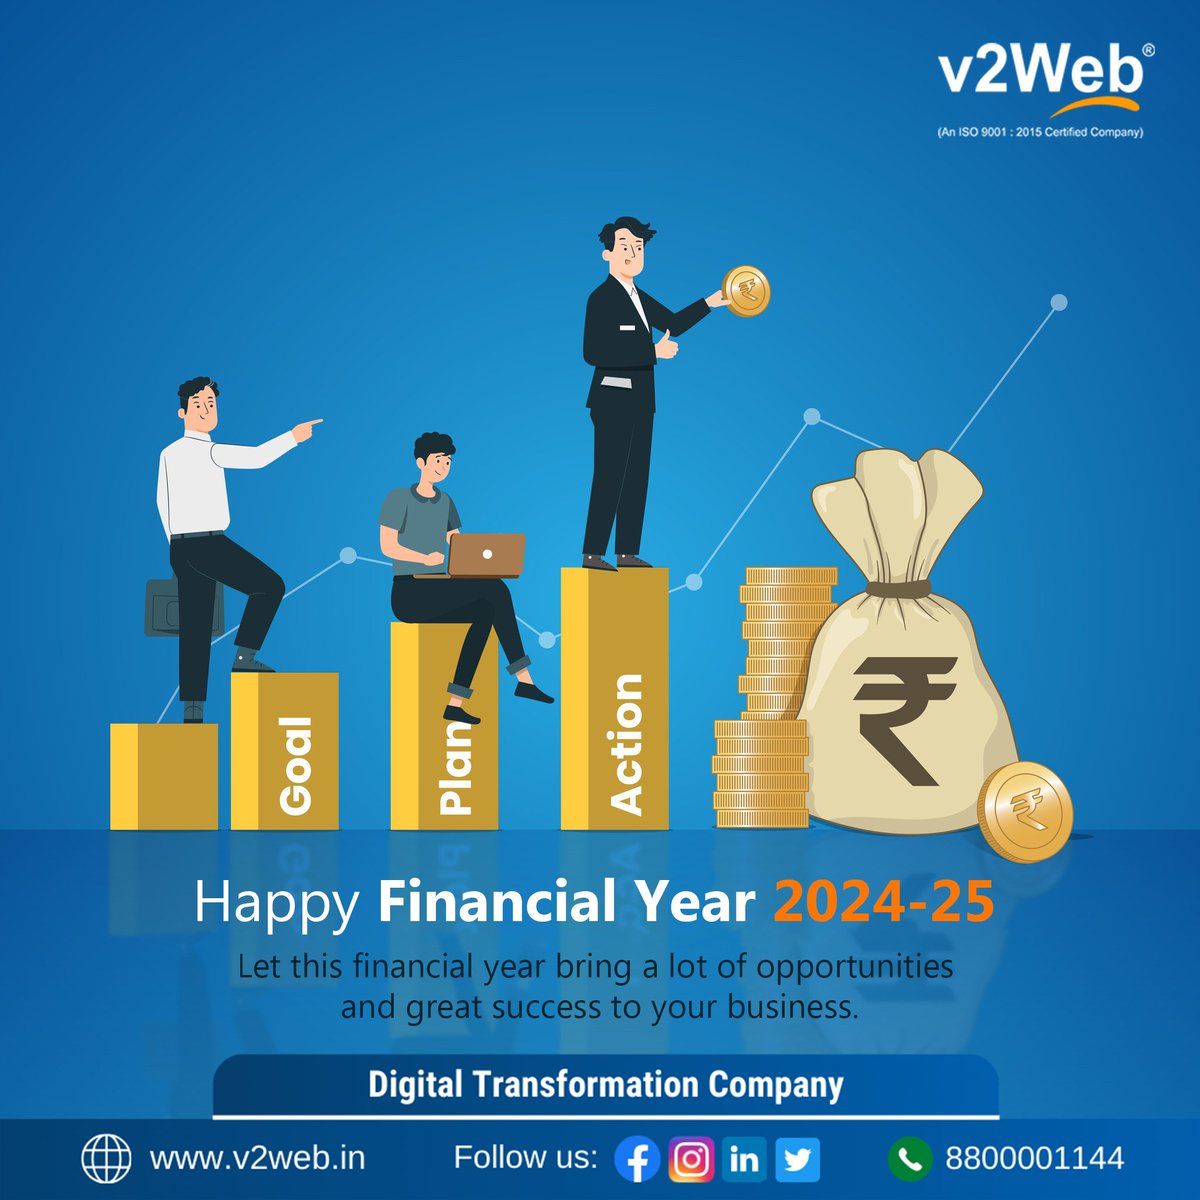 May this financial year bring you more success and boundless achievements. Happy Financial Year 2024
.
.
#HappyFinancialYear #Financial #FinancialYear #V2web #DigitalTransformation #FinancialYear2024